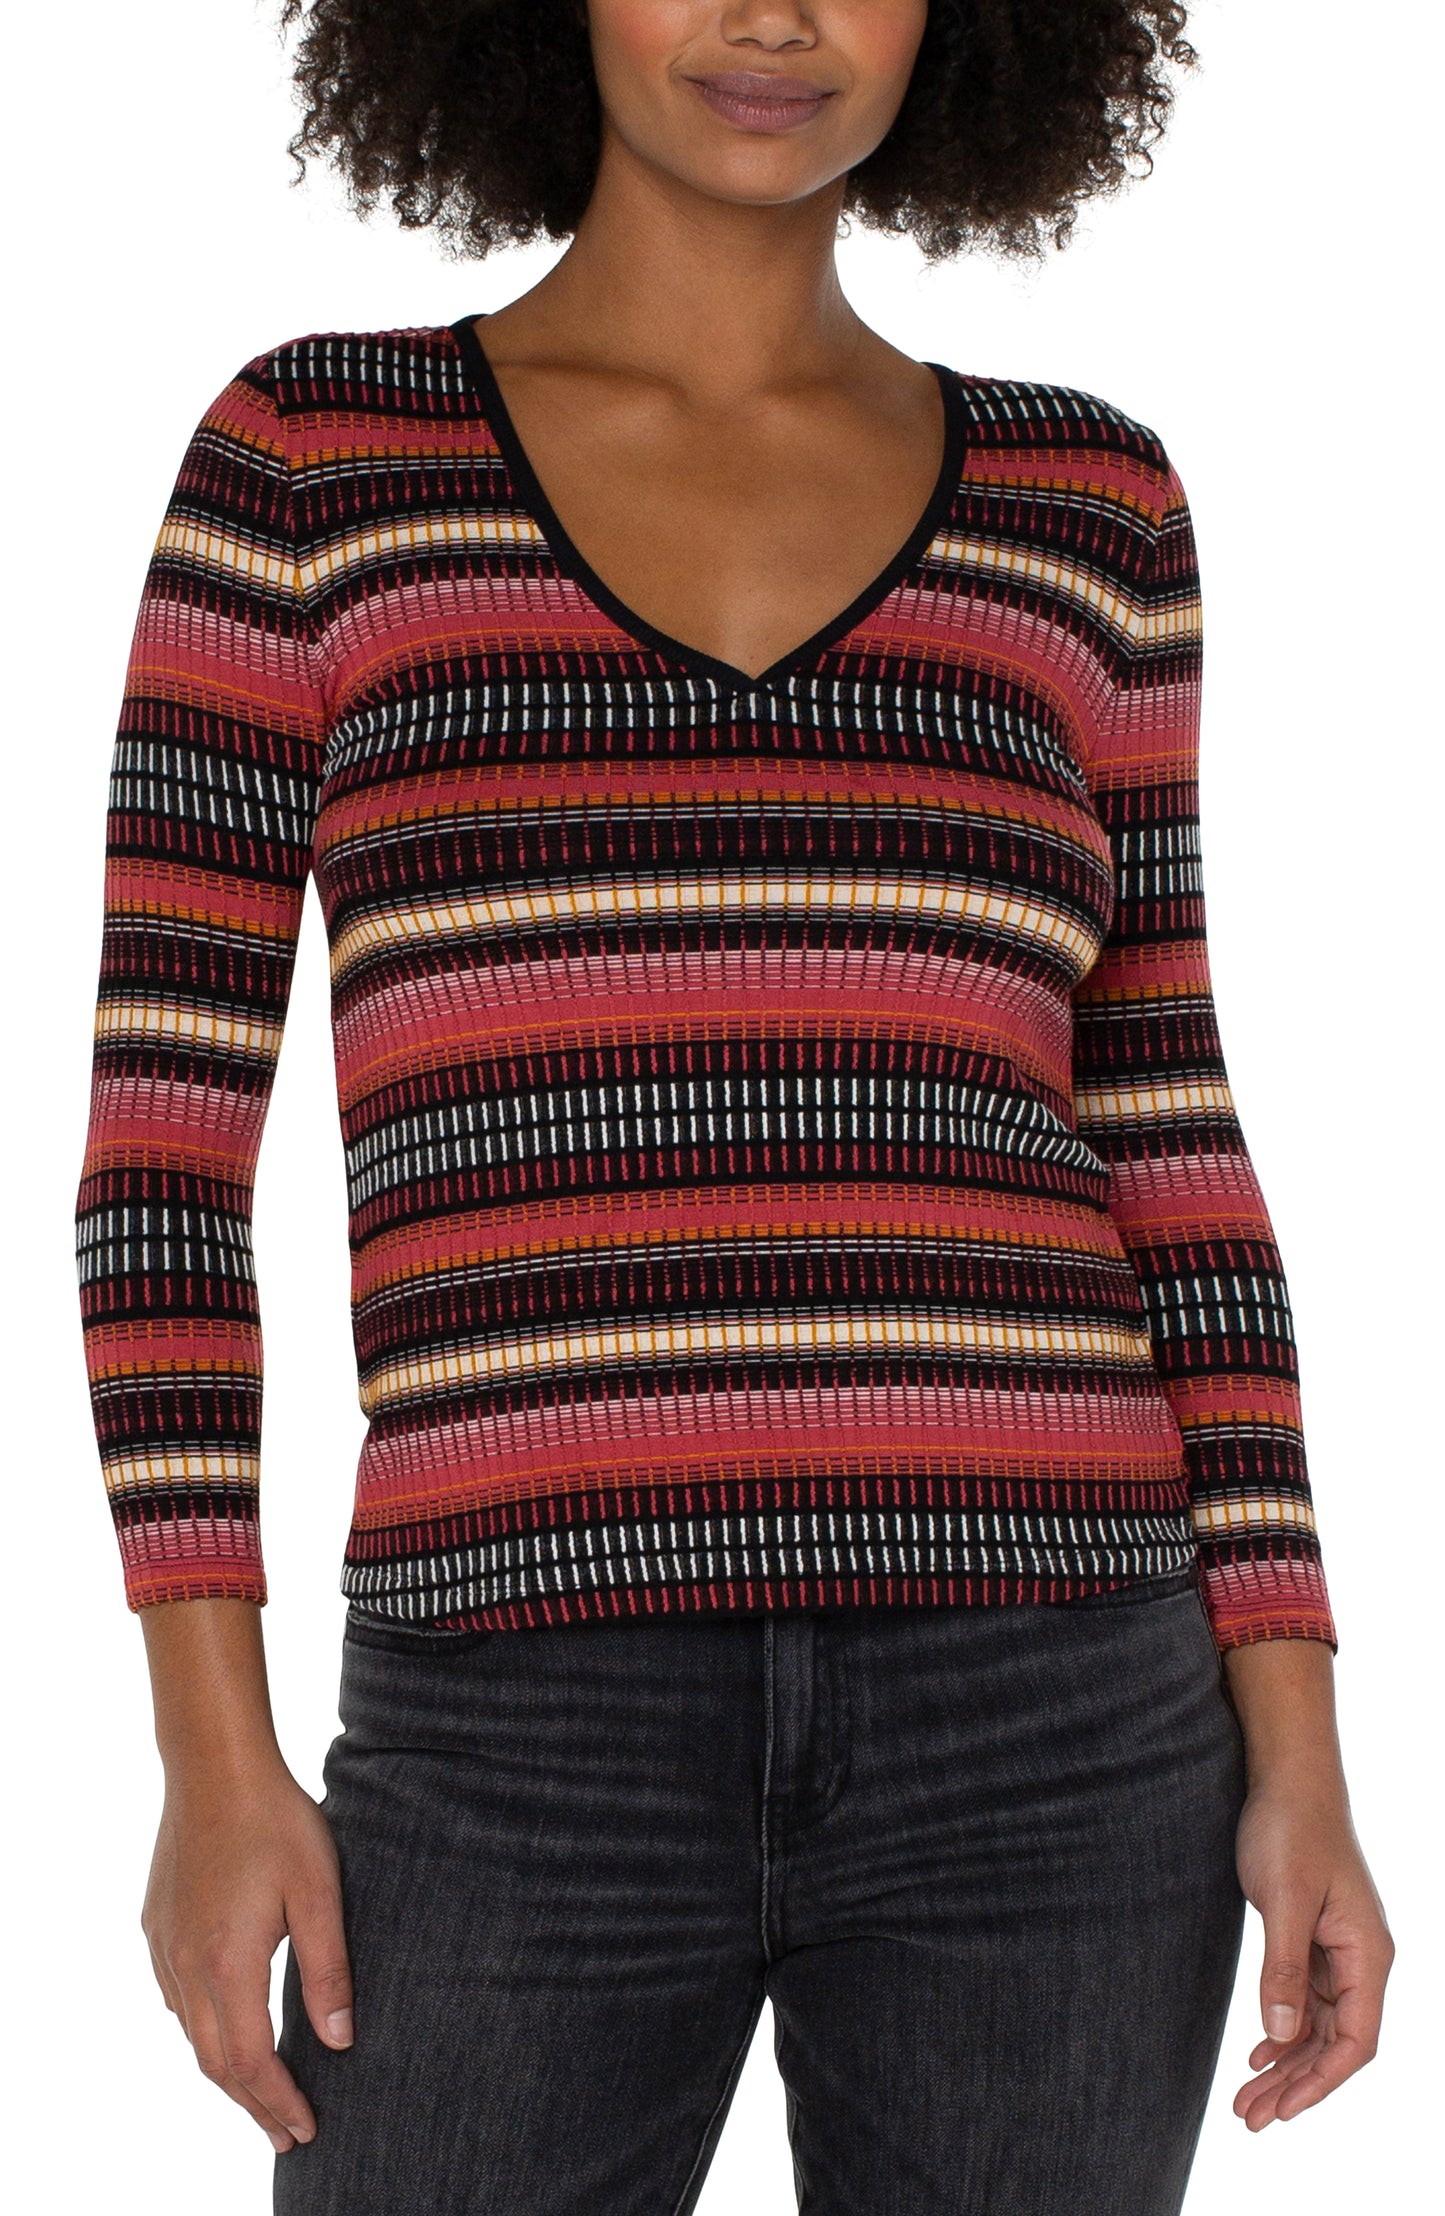 Liverpool 3/4 Sleeve V Neck Knit Top w/Contrast (multi color abstract stripe)